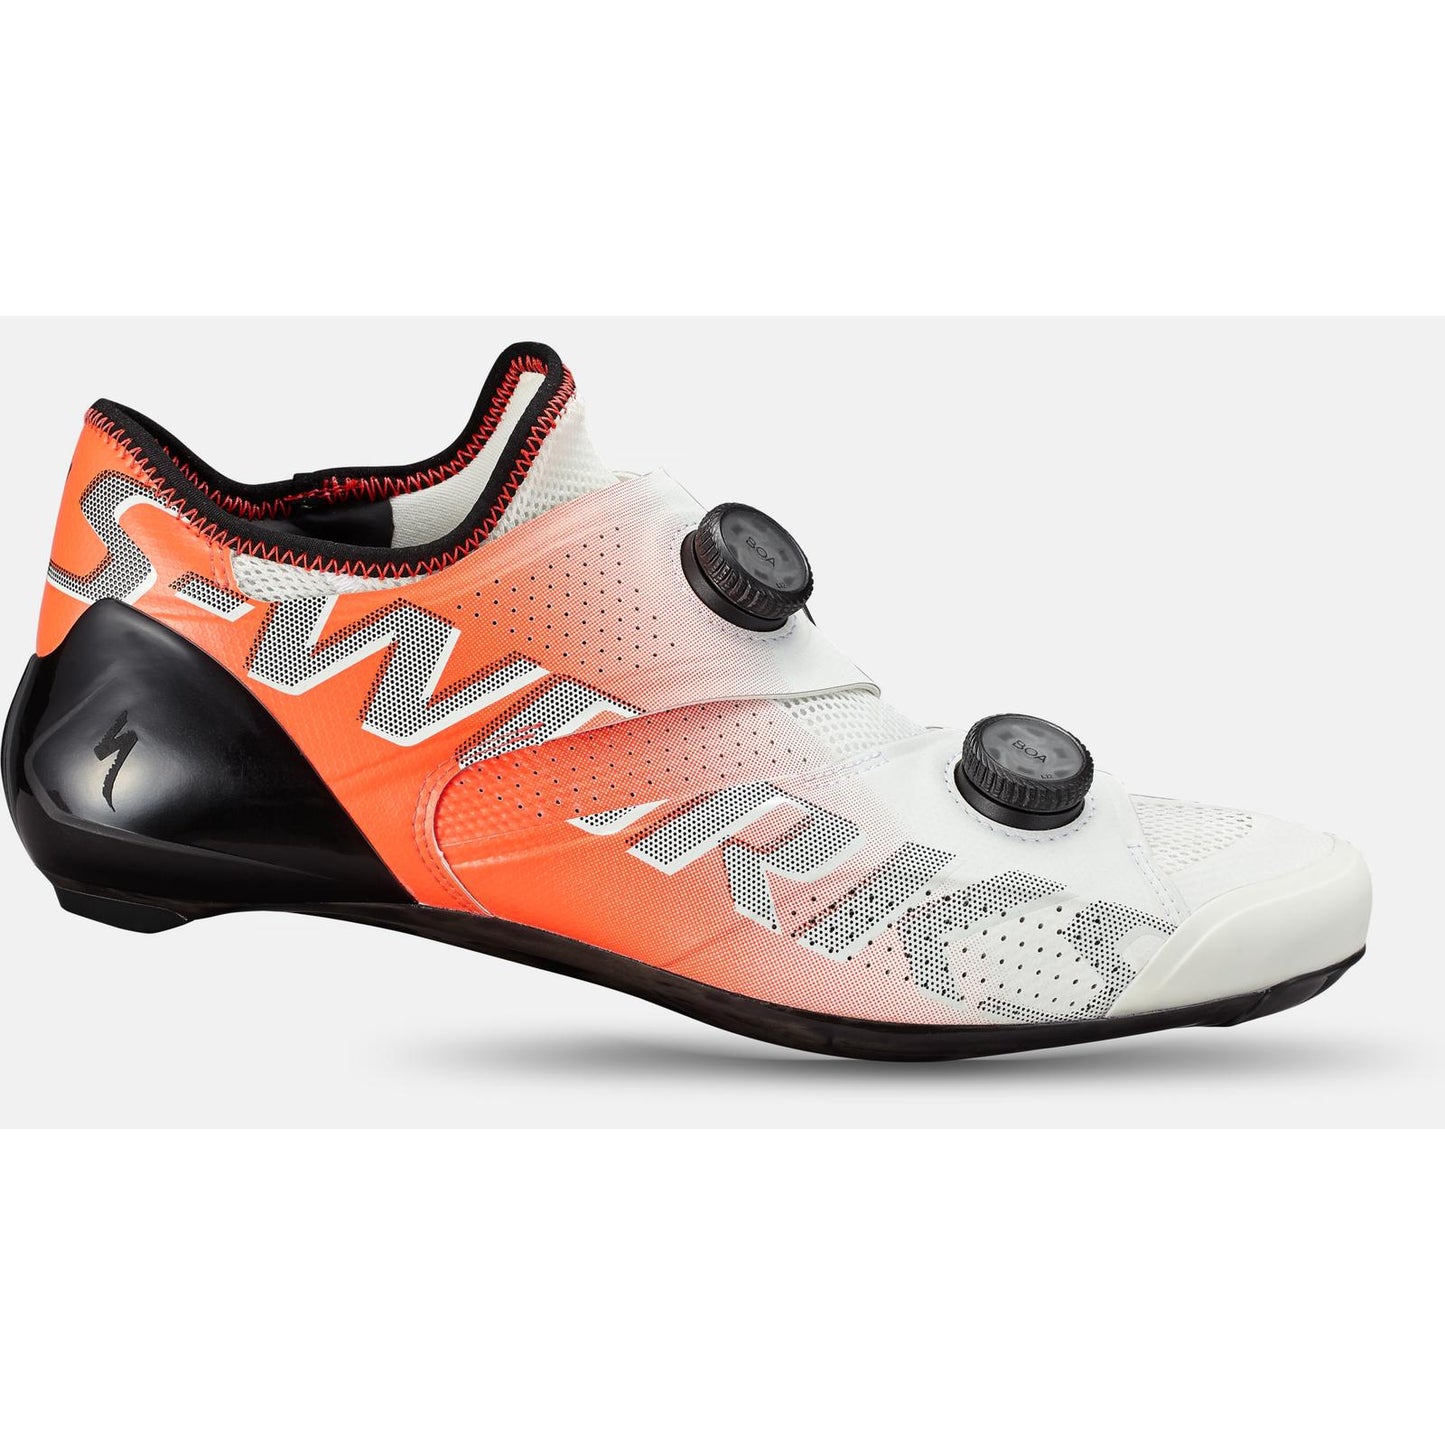 Specialized S-Works Ares Road Shoes - Shoes - Bicycle Warehouse